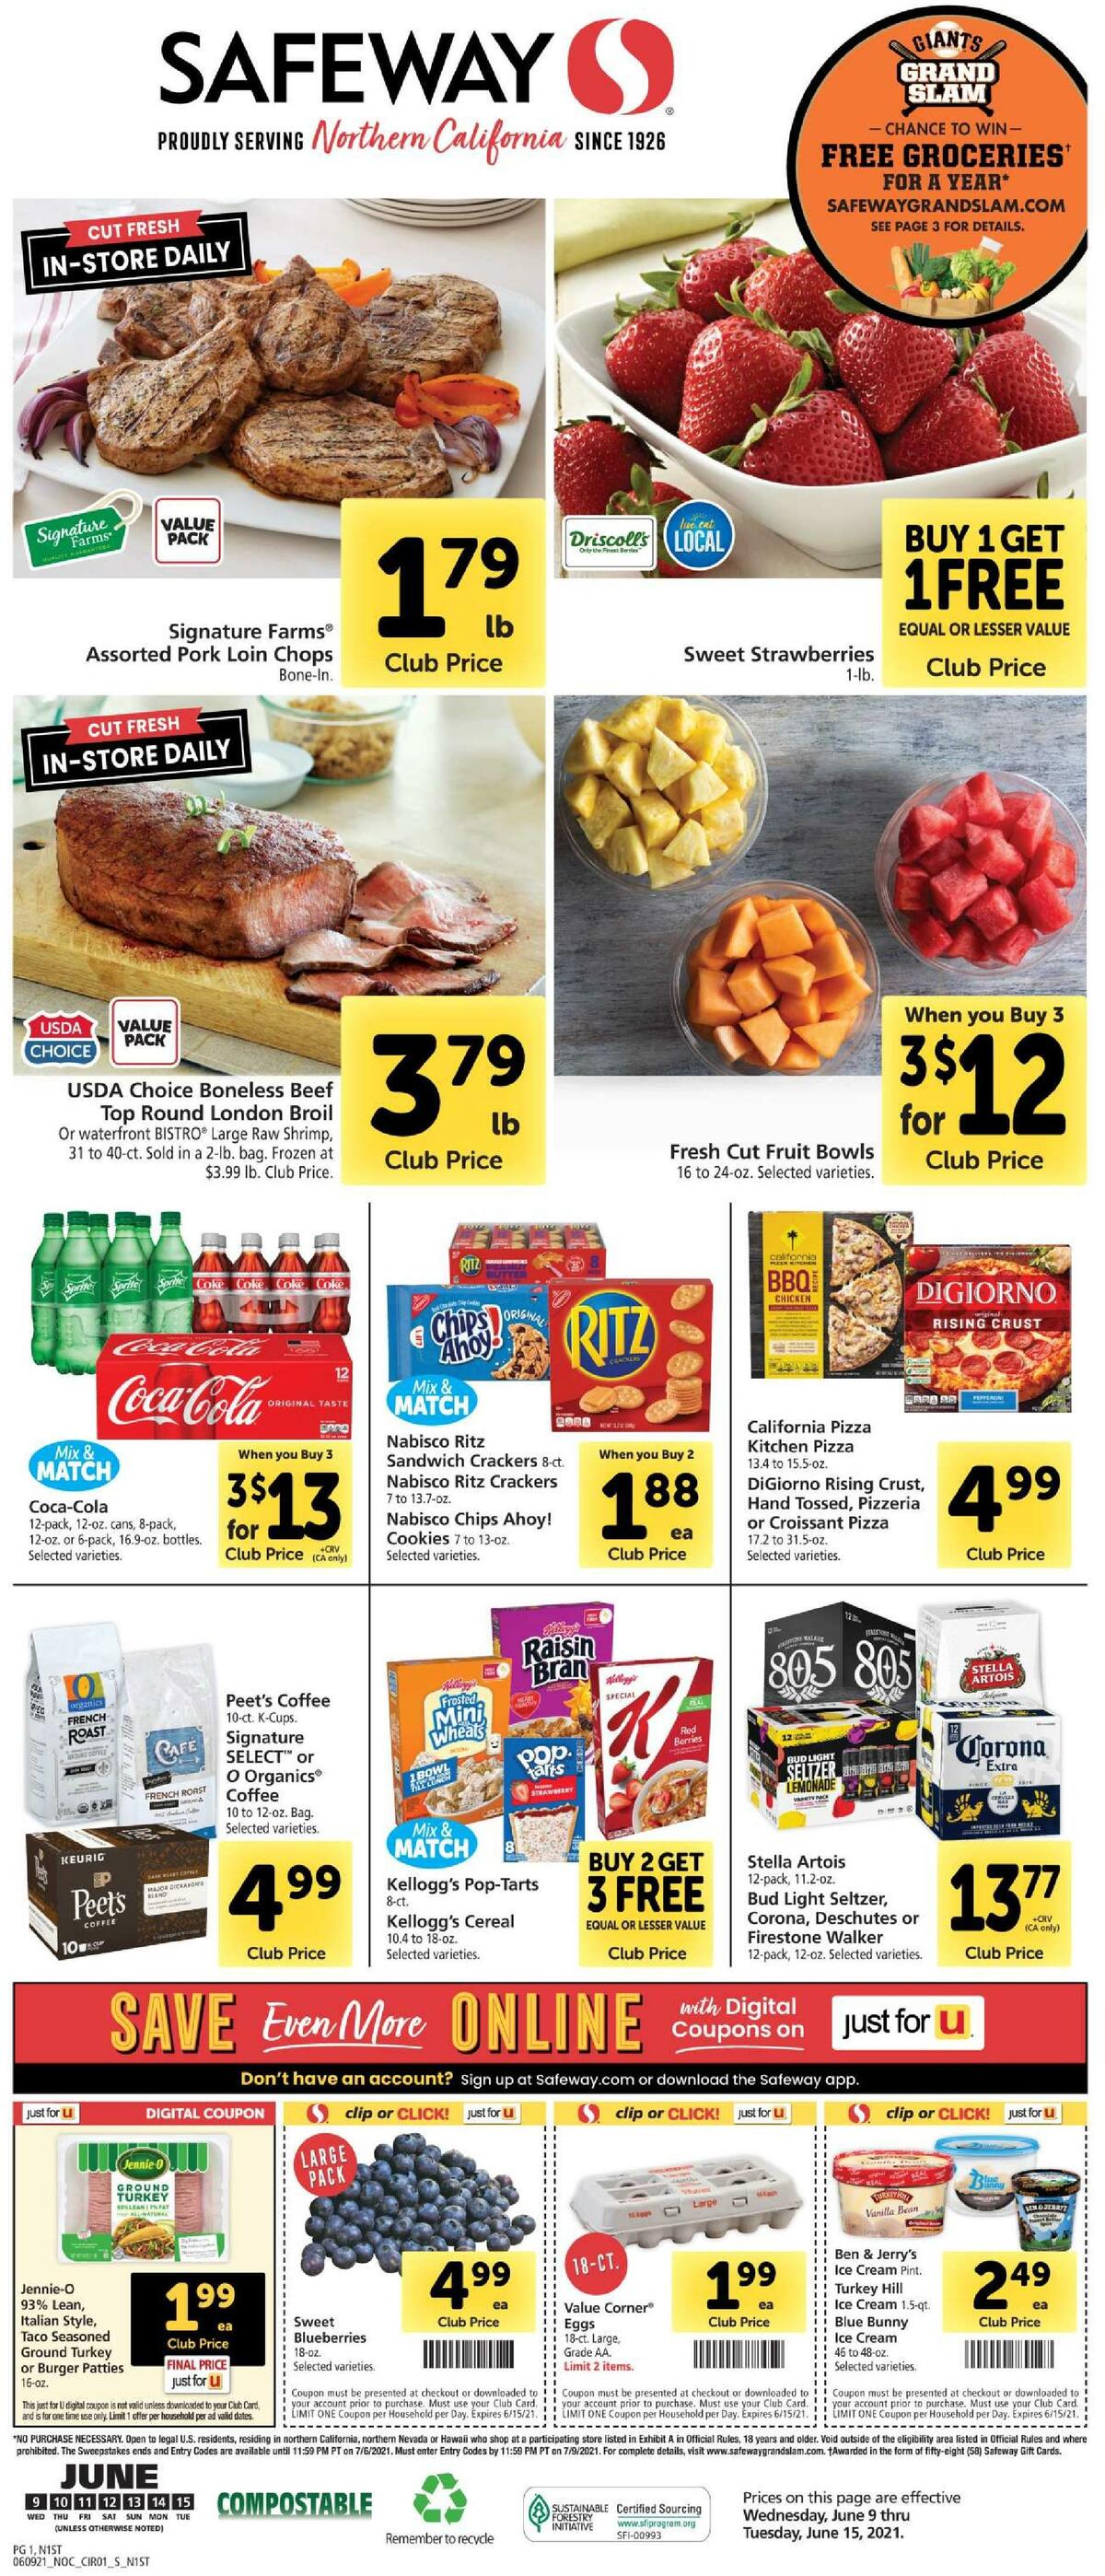 Safeway Weekly Ads & Special Buys from June 9